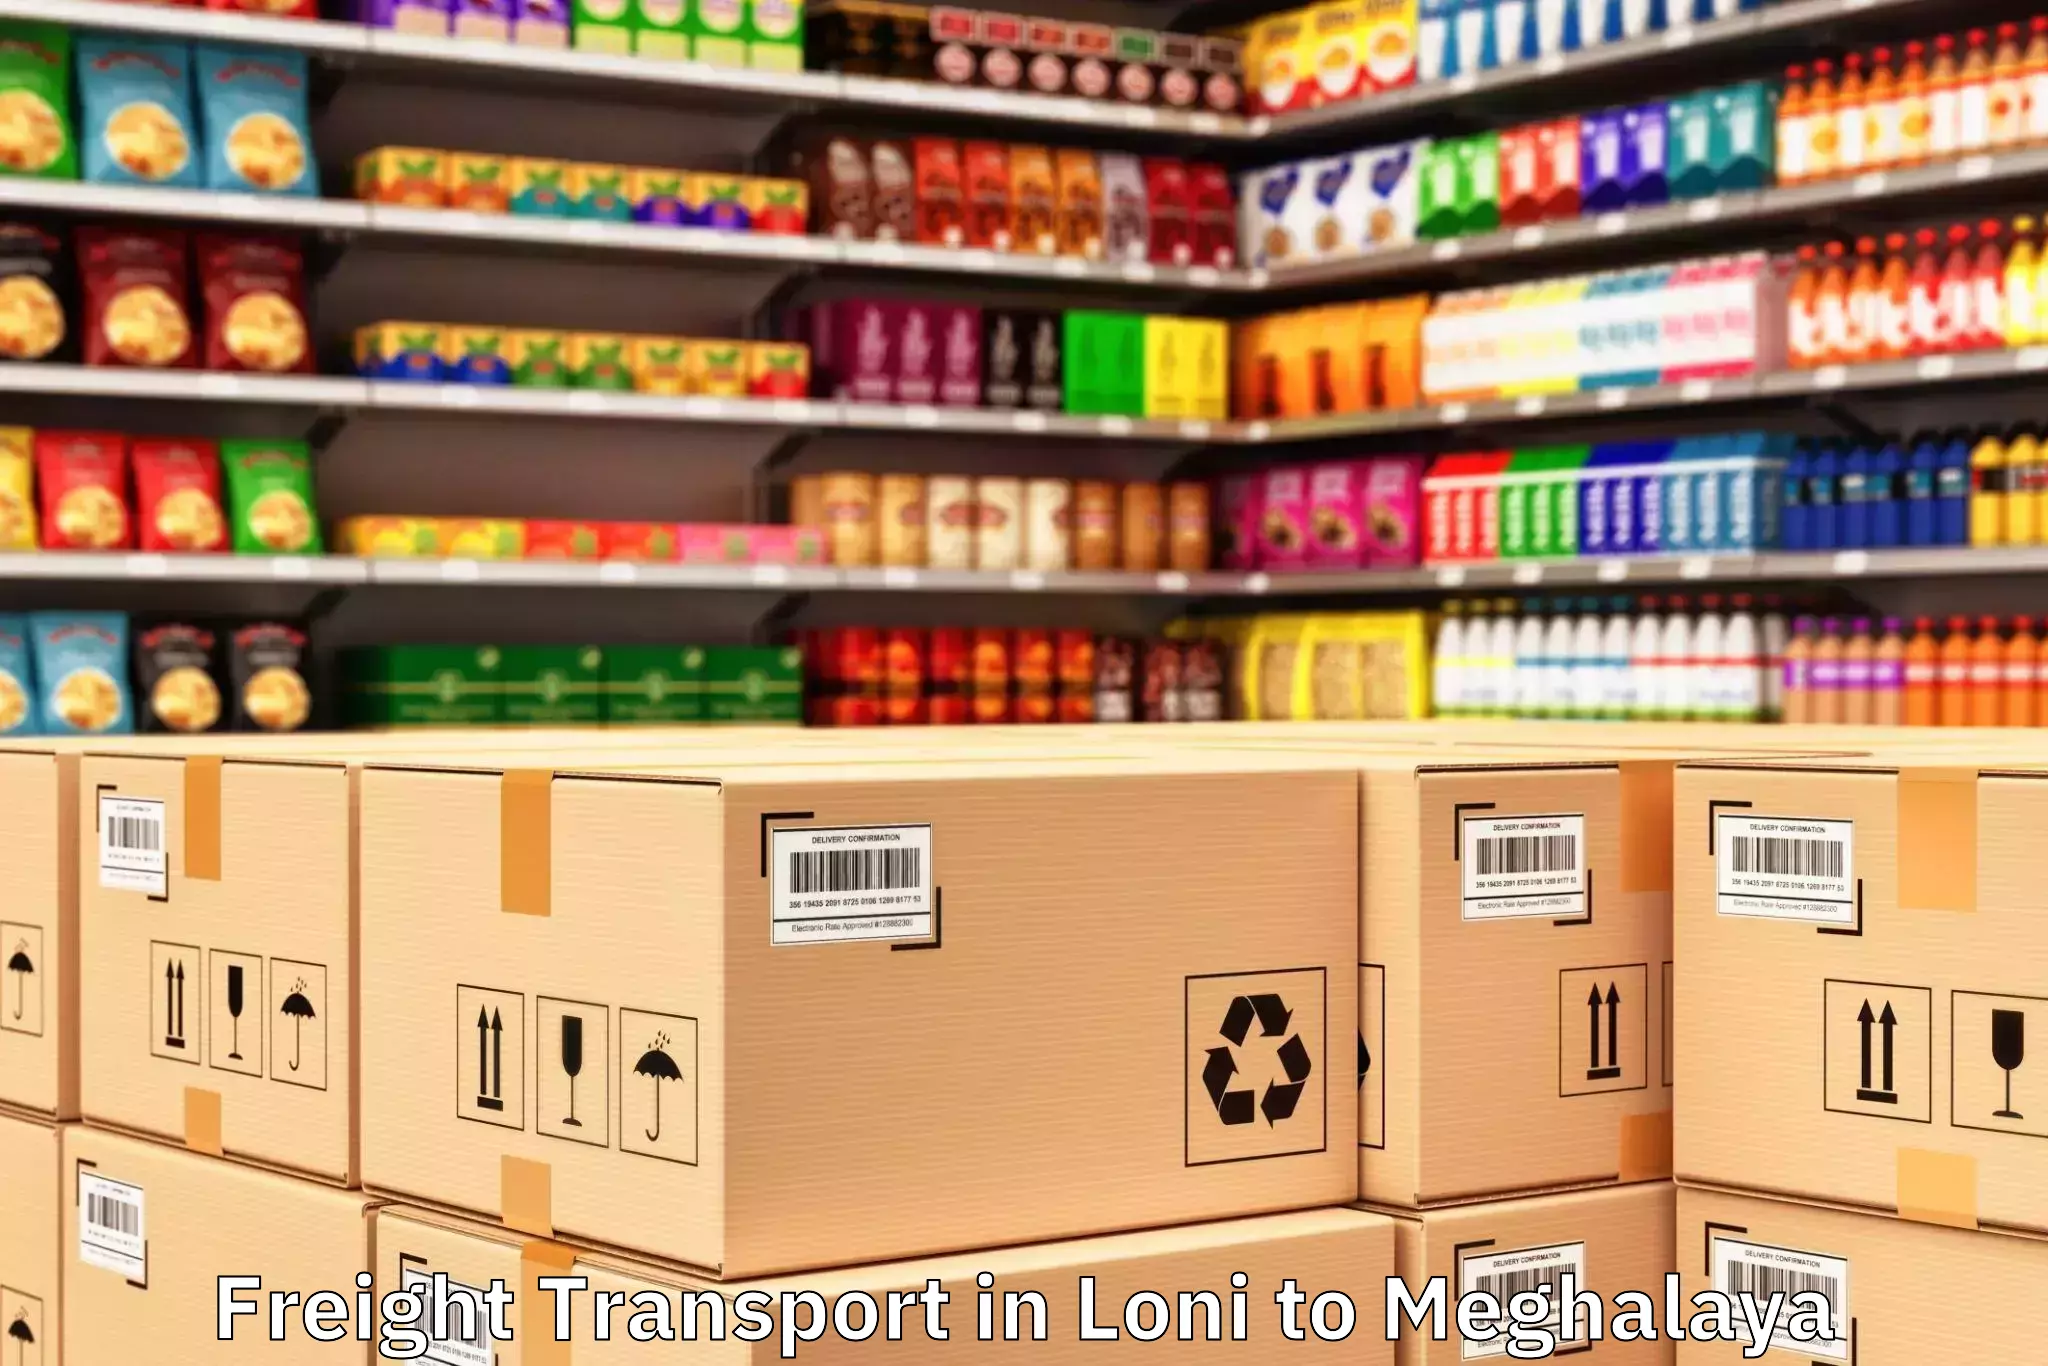 Affordable Loni to Meghalaya Freight Transport